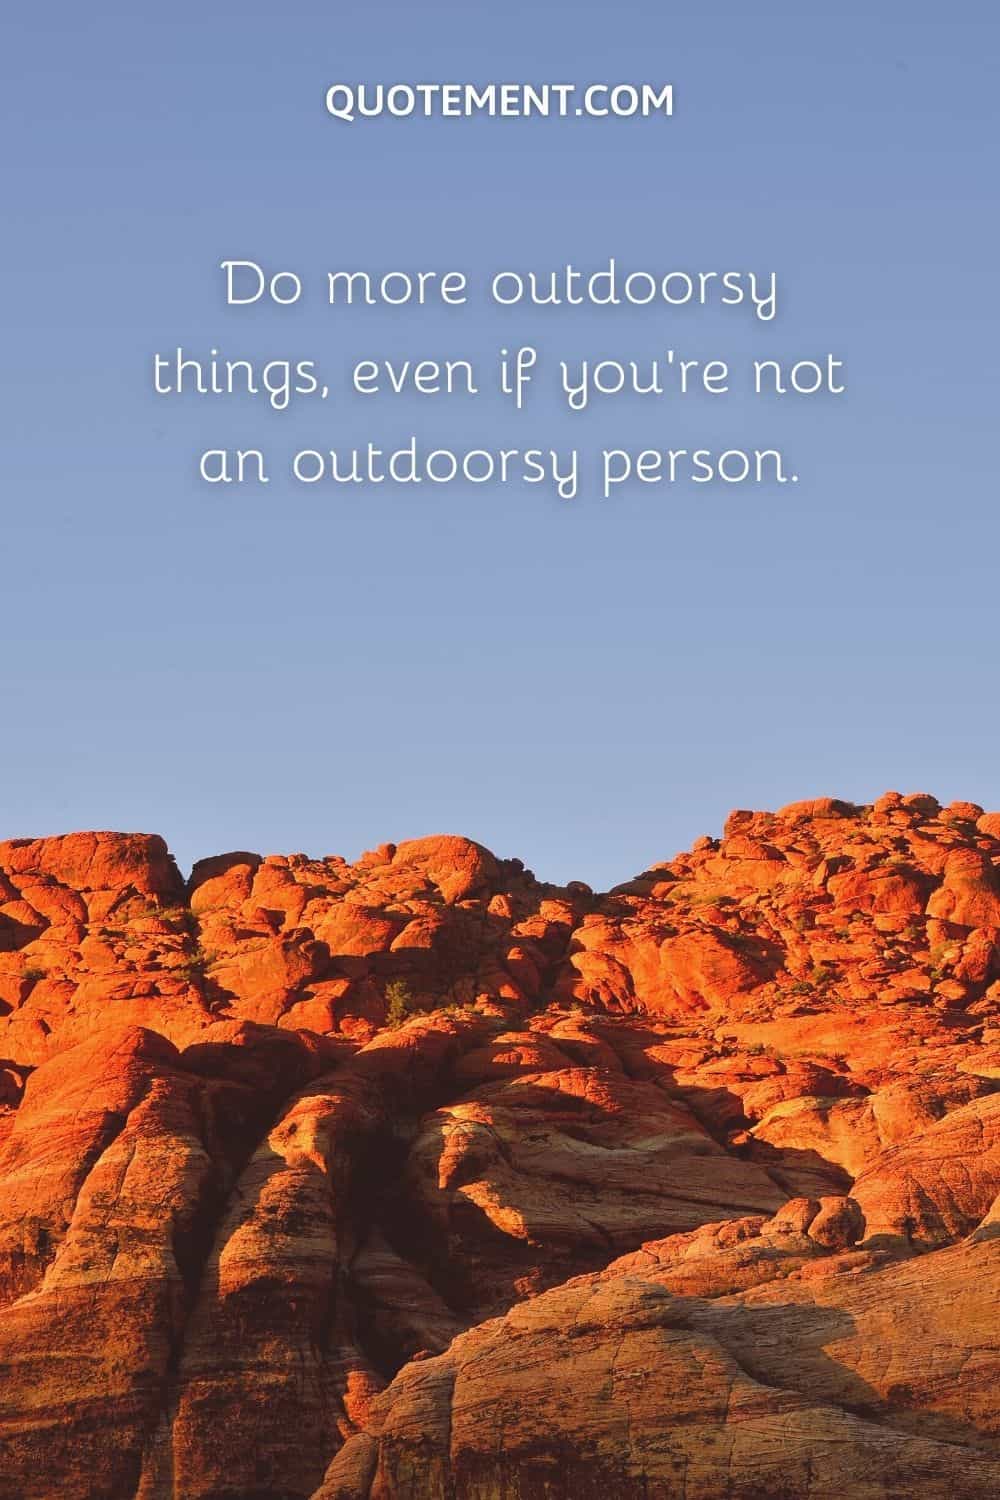 Do more outdoorsy things, even if you’re not an outdoorsy person.